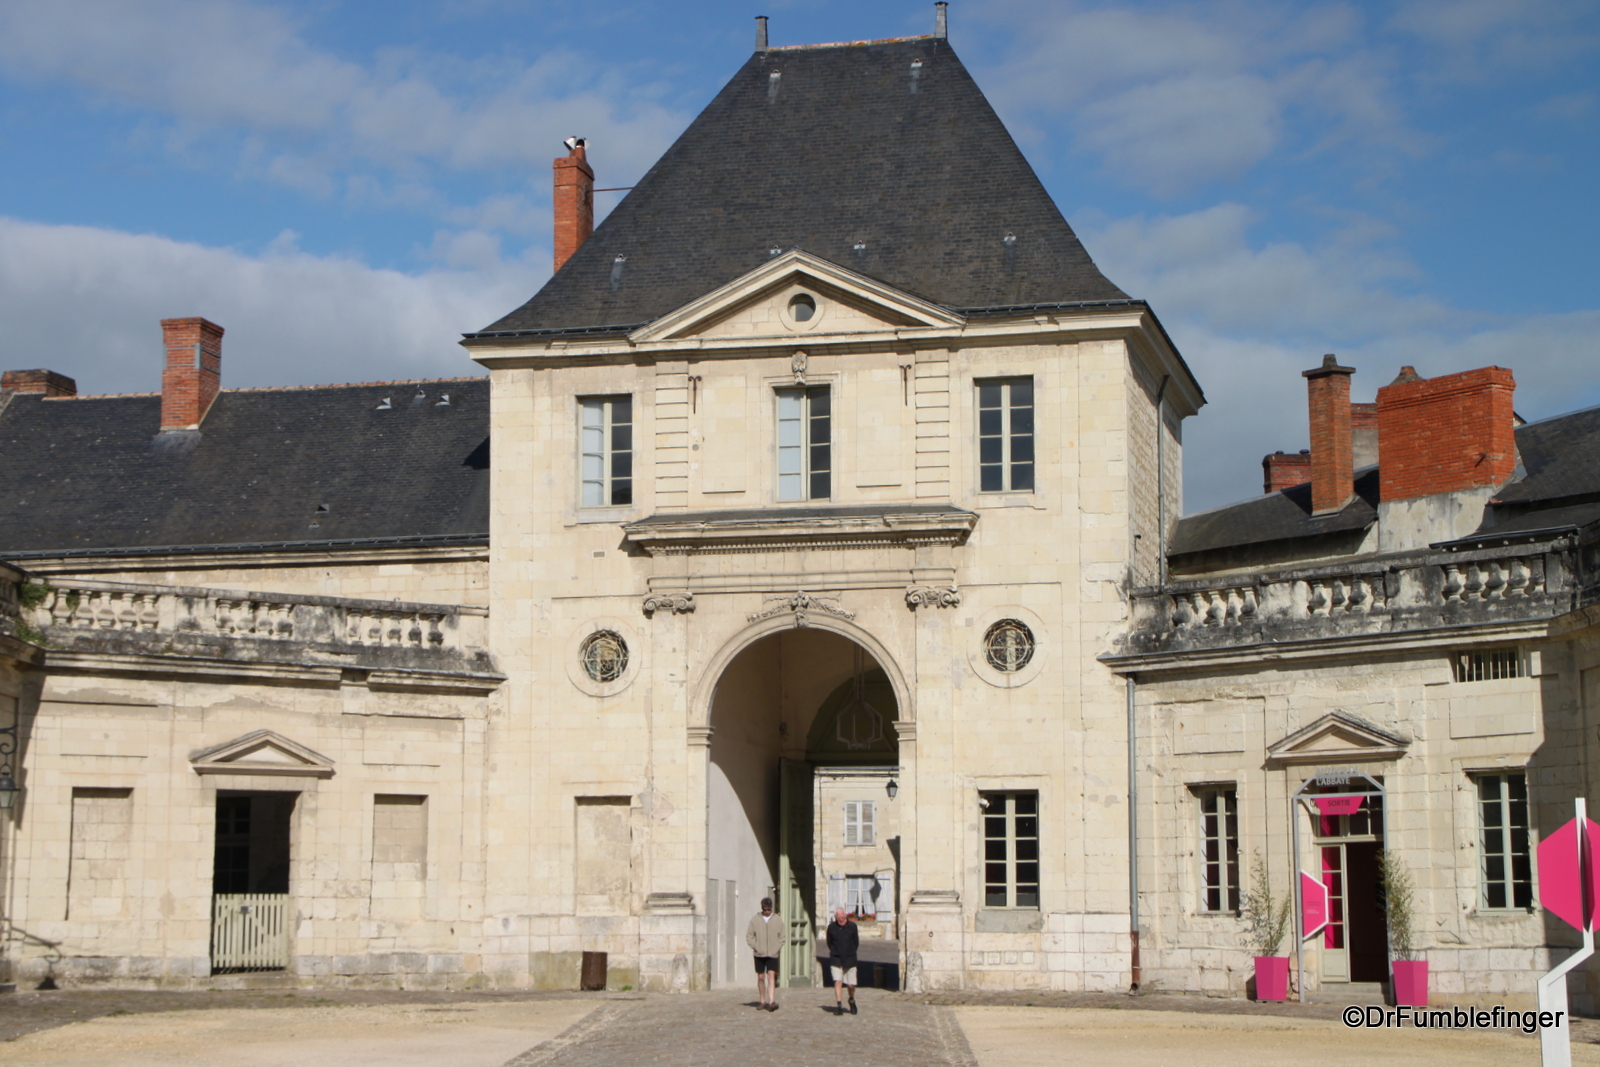 Outer courtyard within Abbaye Fontevraud